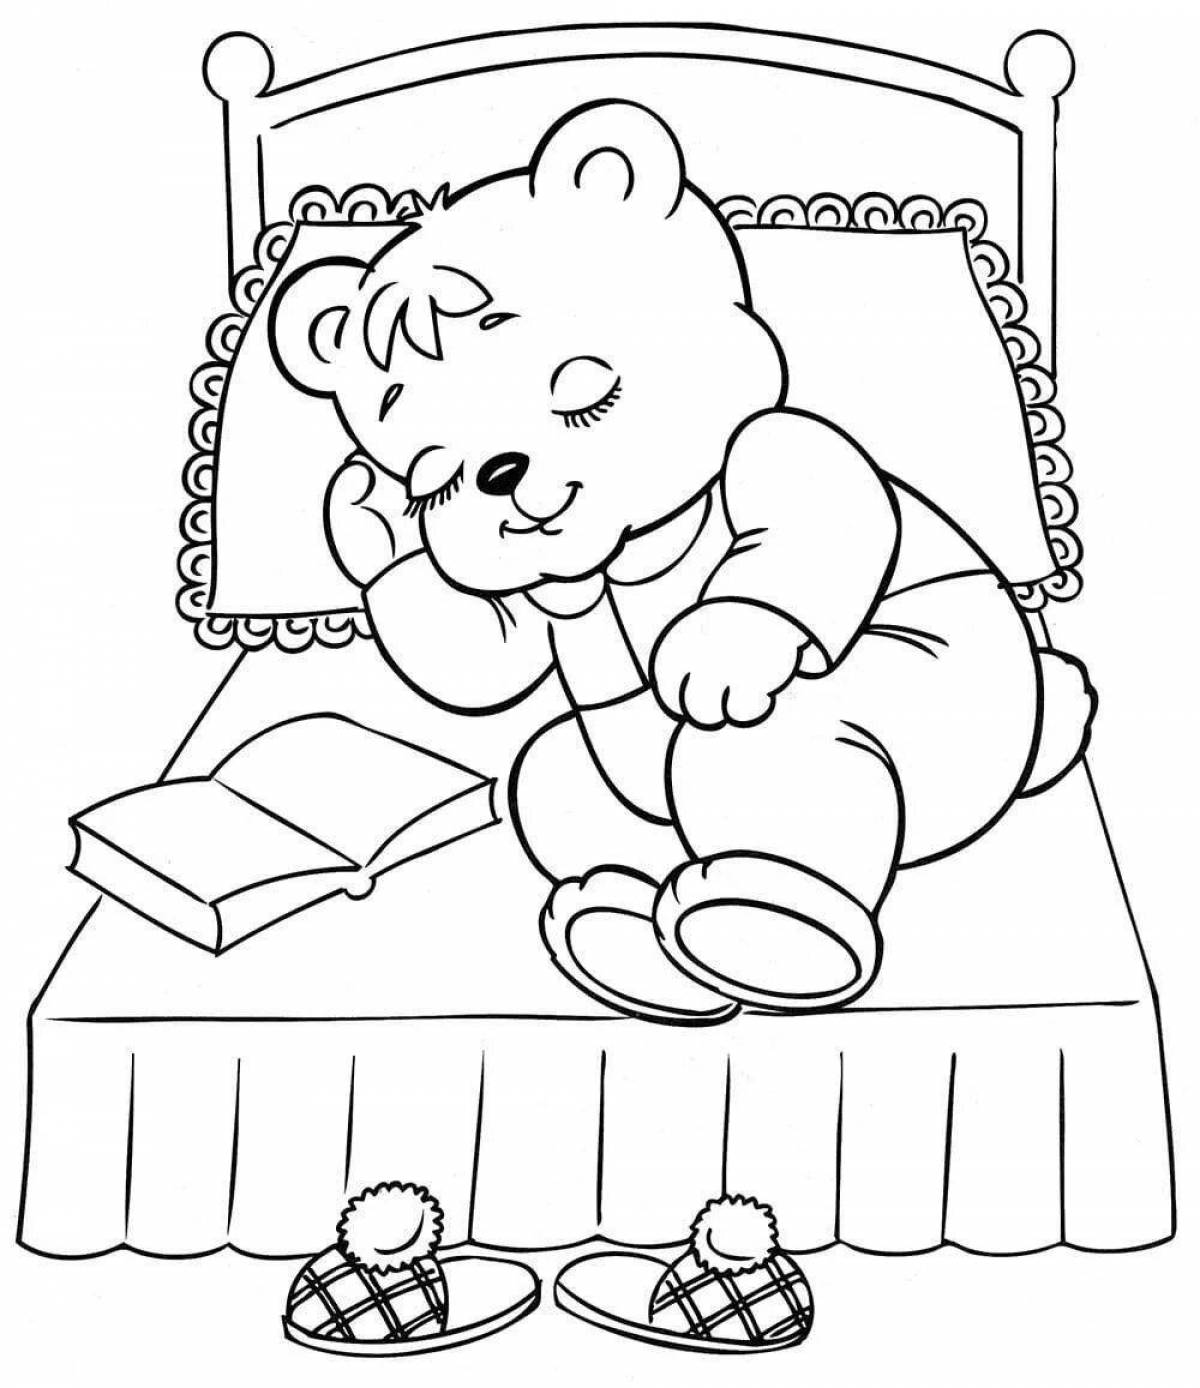 Happy sleeping bear coloring book for kids